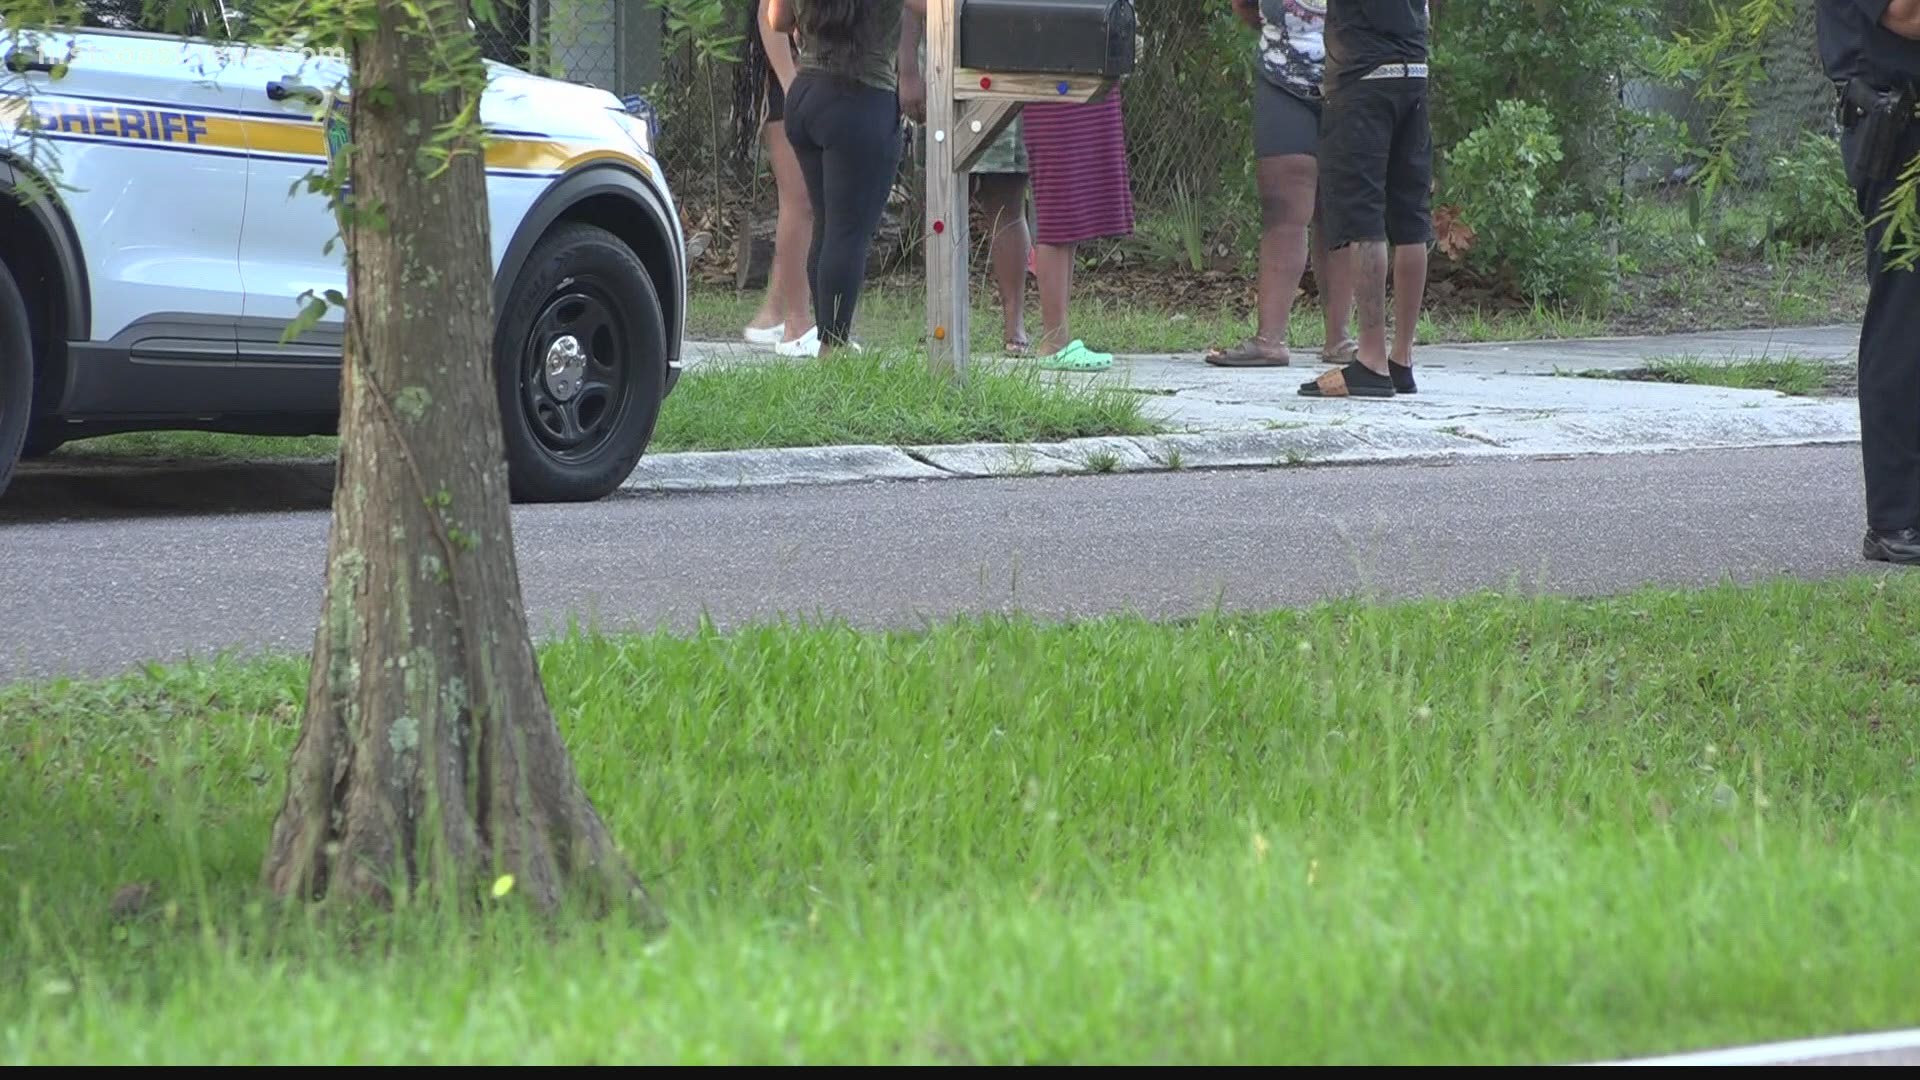 15-year-old recovering after being stabbed at home in Northwest Jacksonville